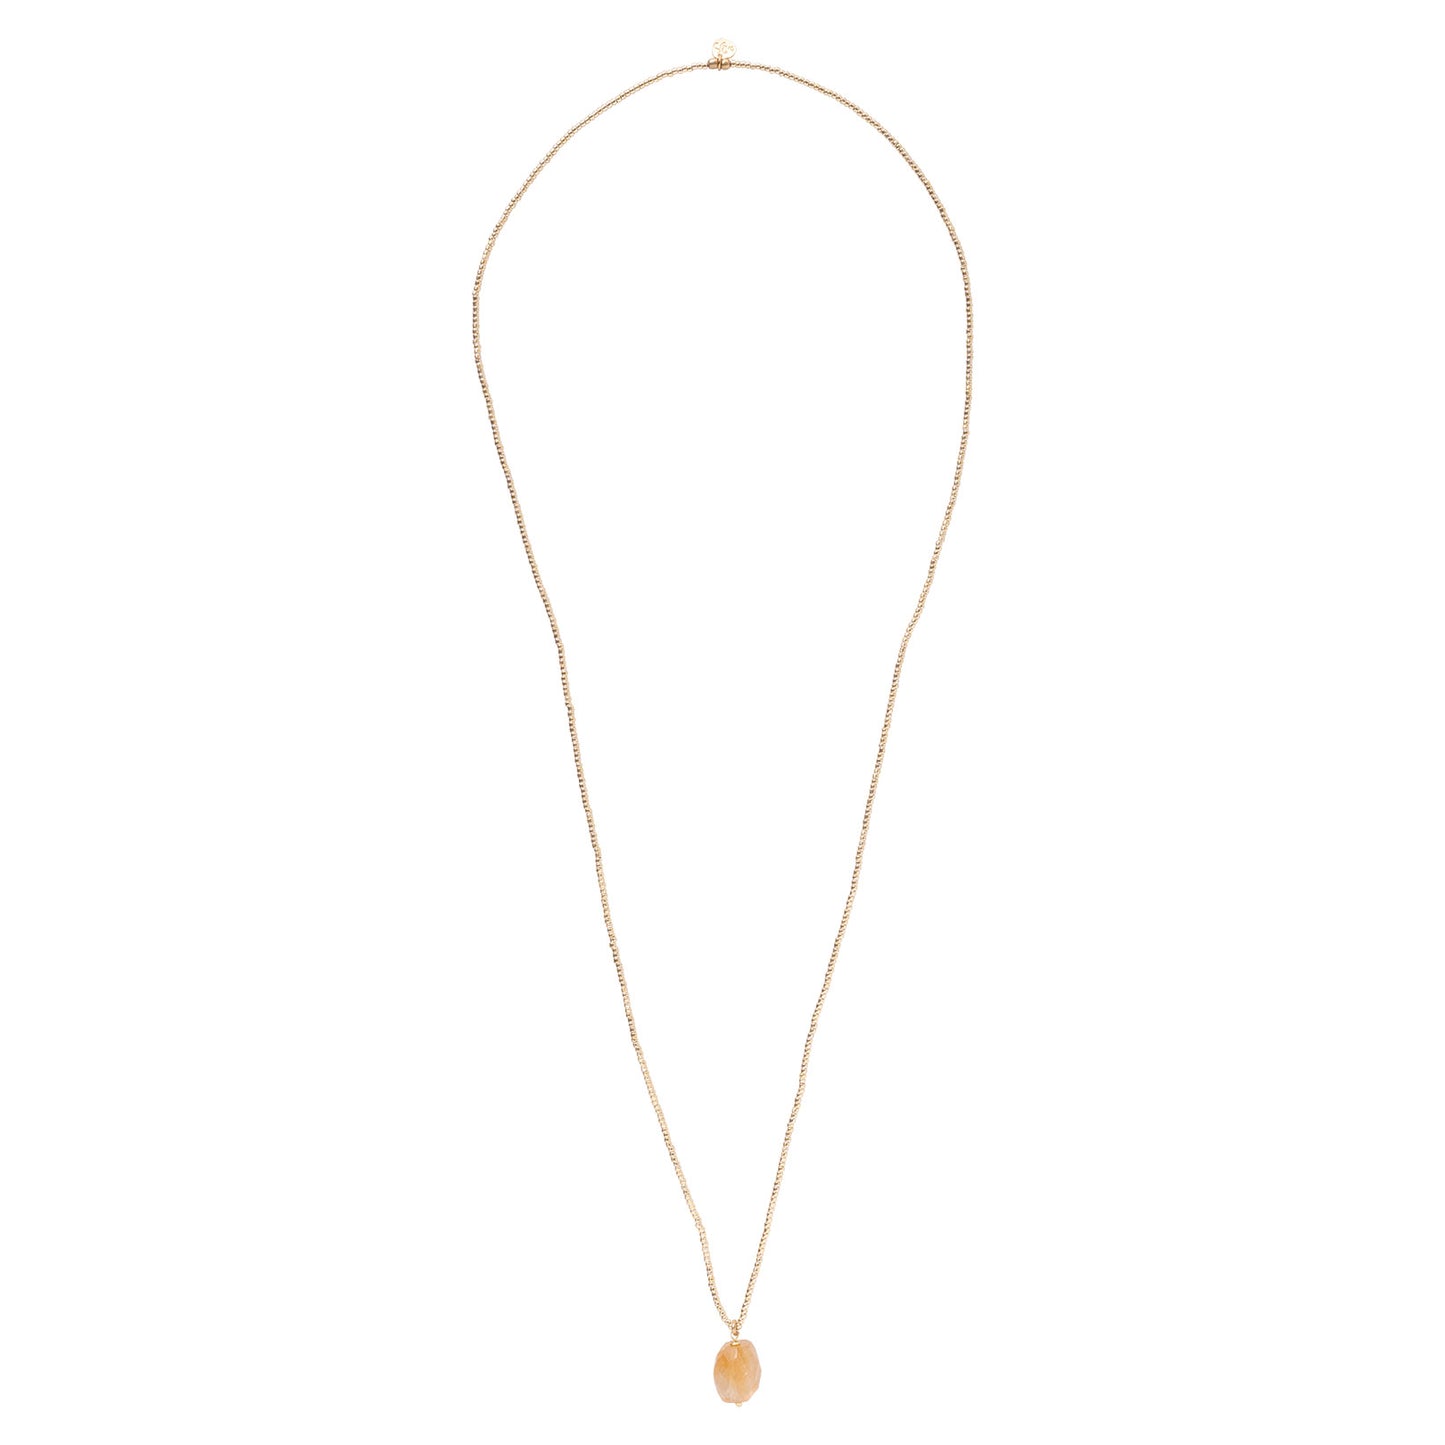 Calm citrine stone and golden pearl necklace